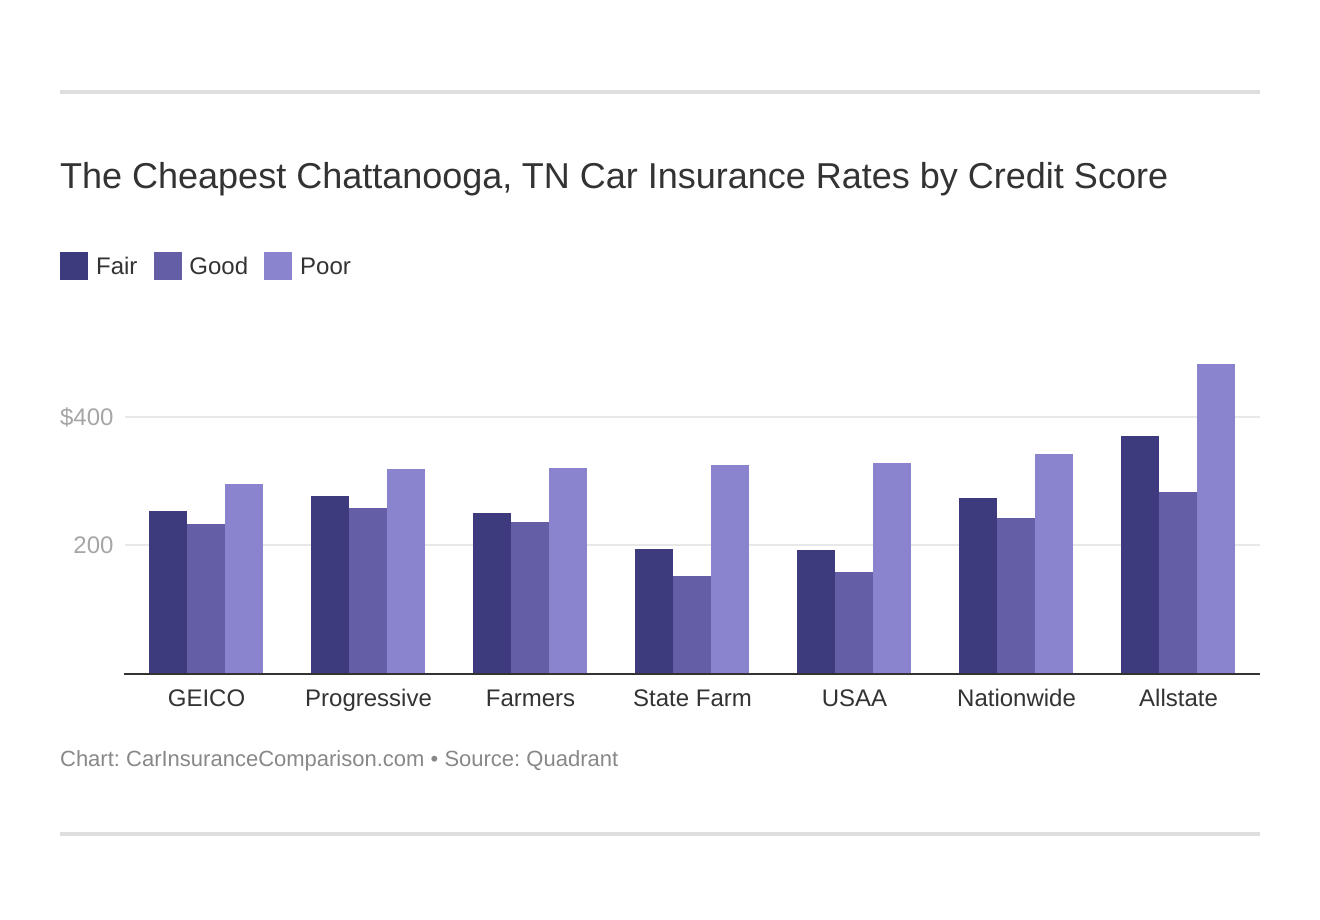 The Cheapest Chattanooga, TN Car Insurance Rates by Credit Score